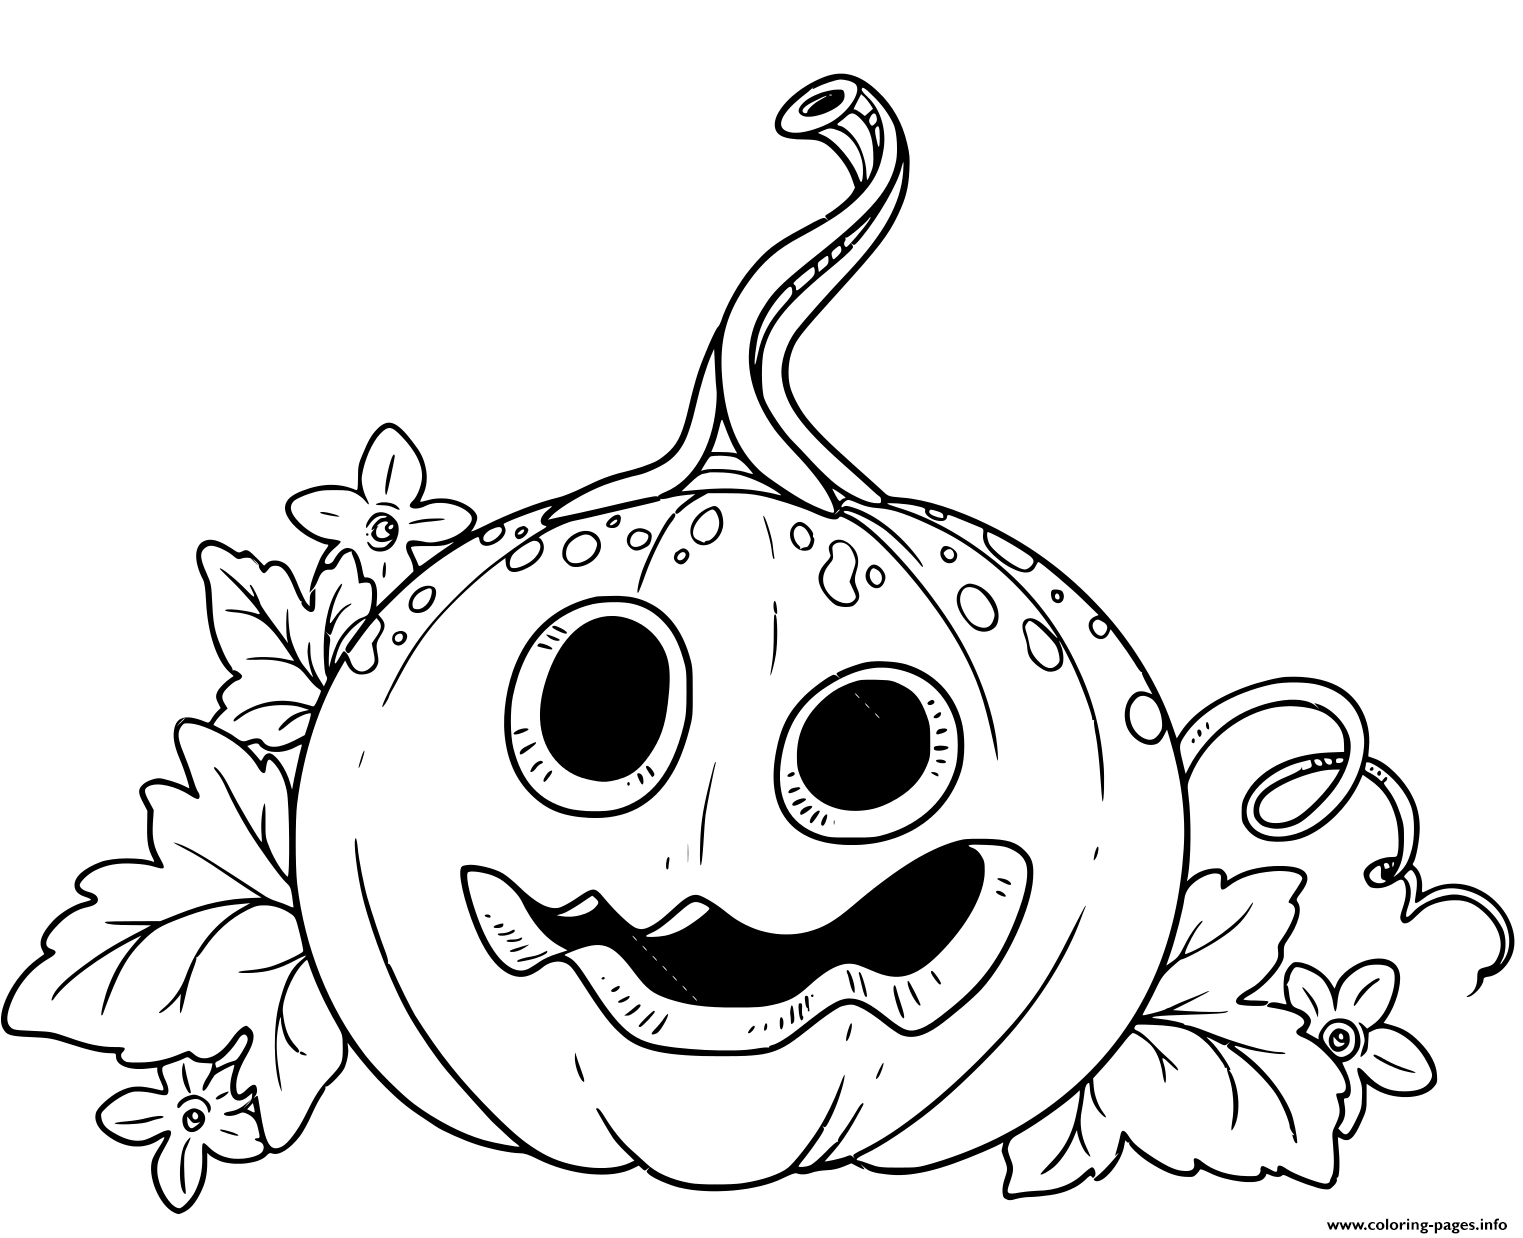 Funny Lantern From Pumpkin With The Cut Out Of A Grin And Leaves coloring